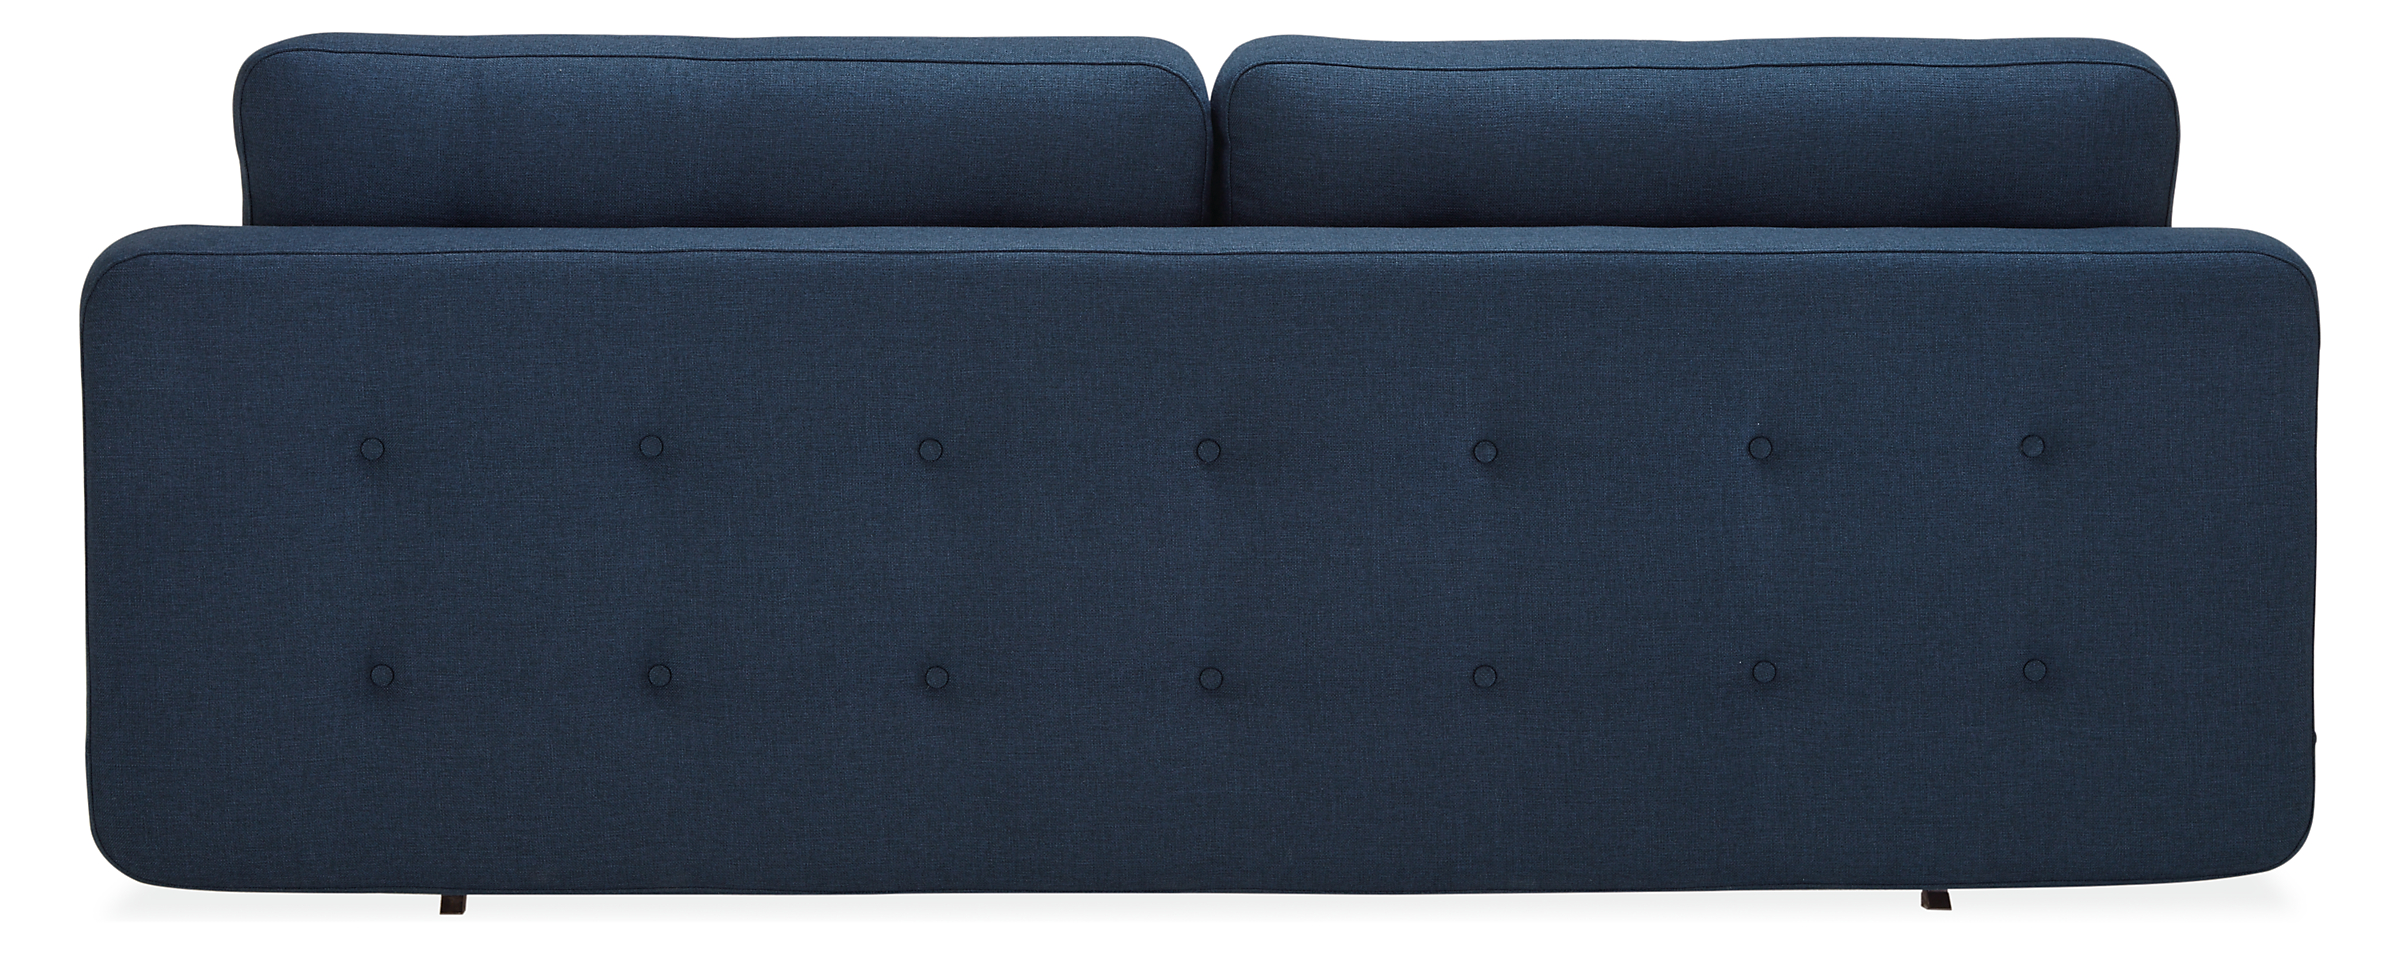 Back view of Deco 79-wide Convertible Sleeper Sofa in Ula Ink.